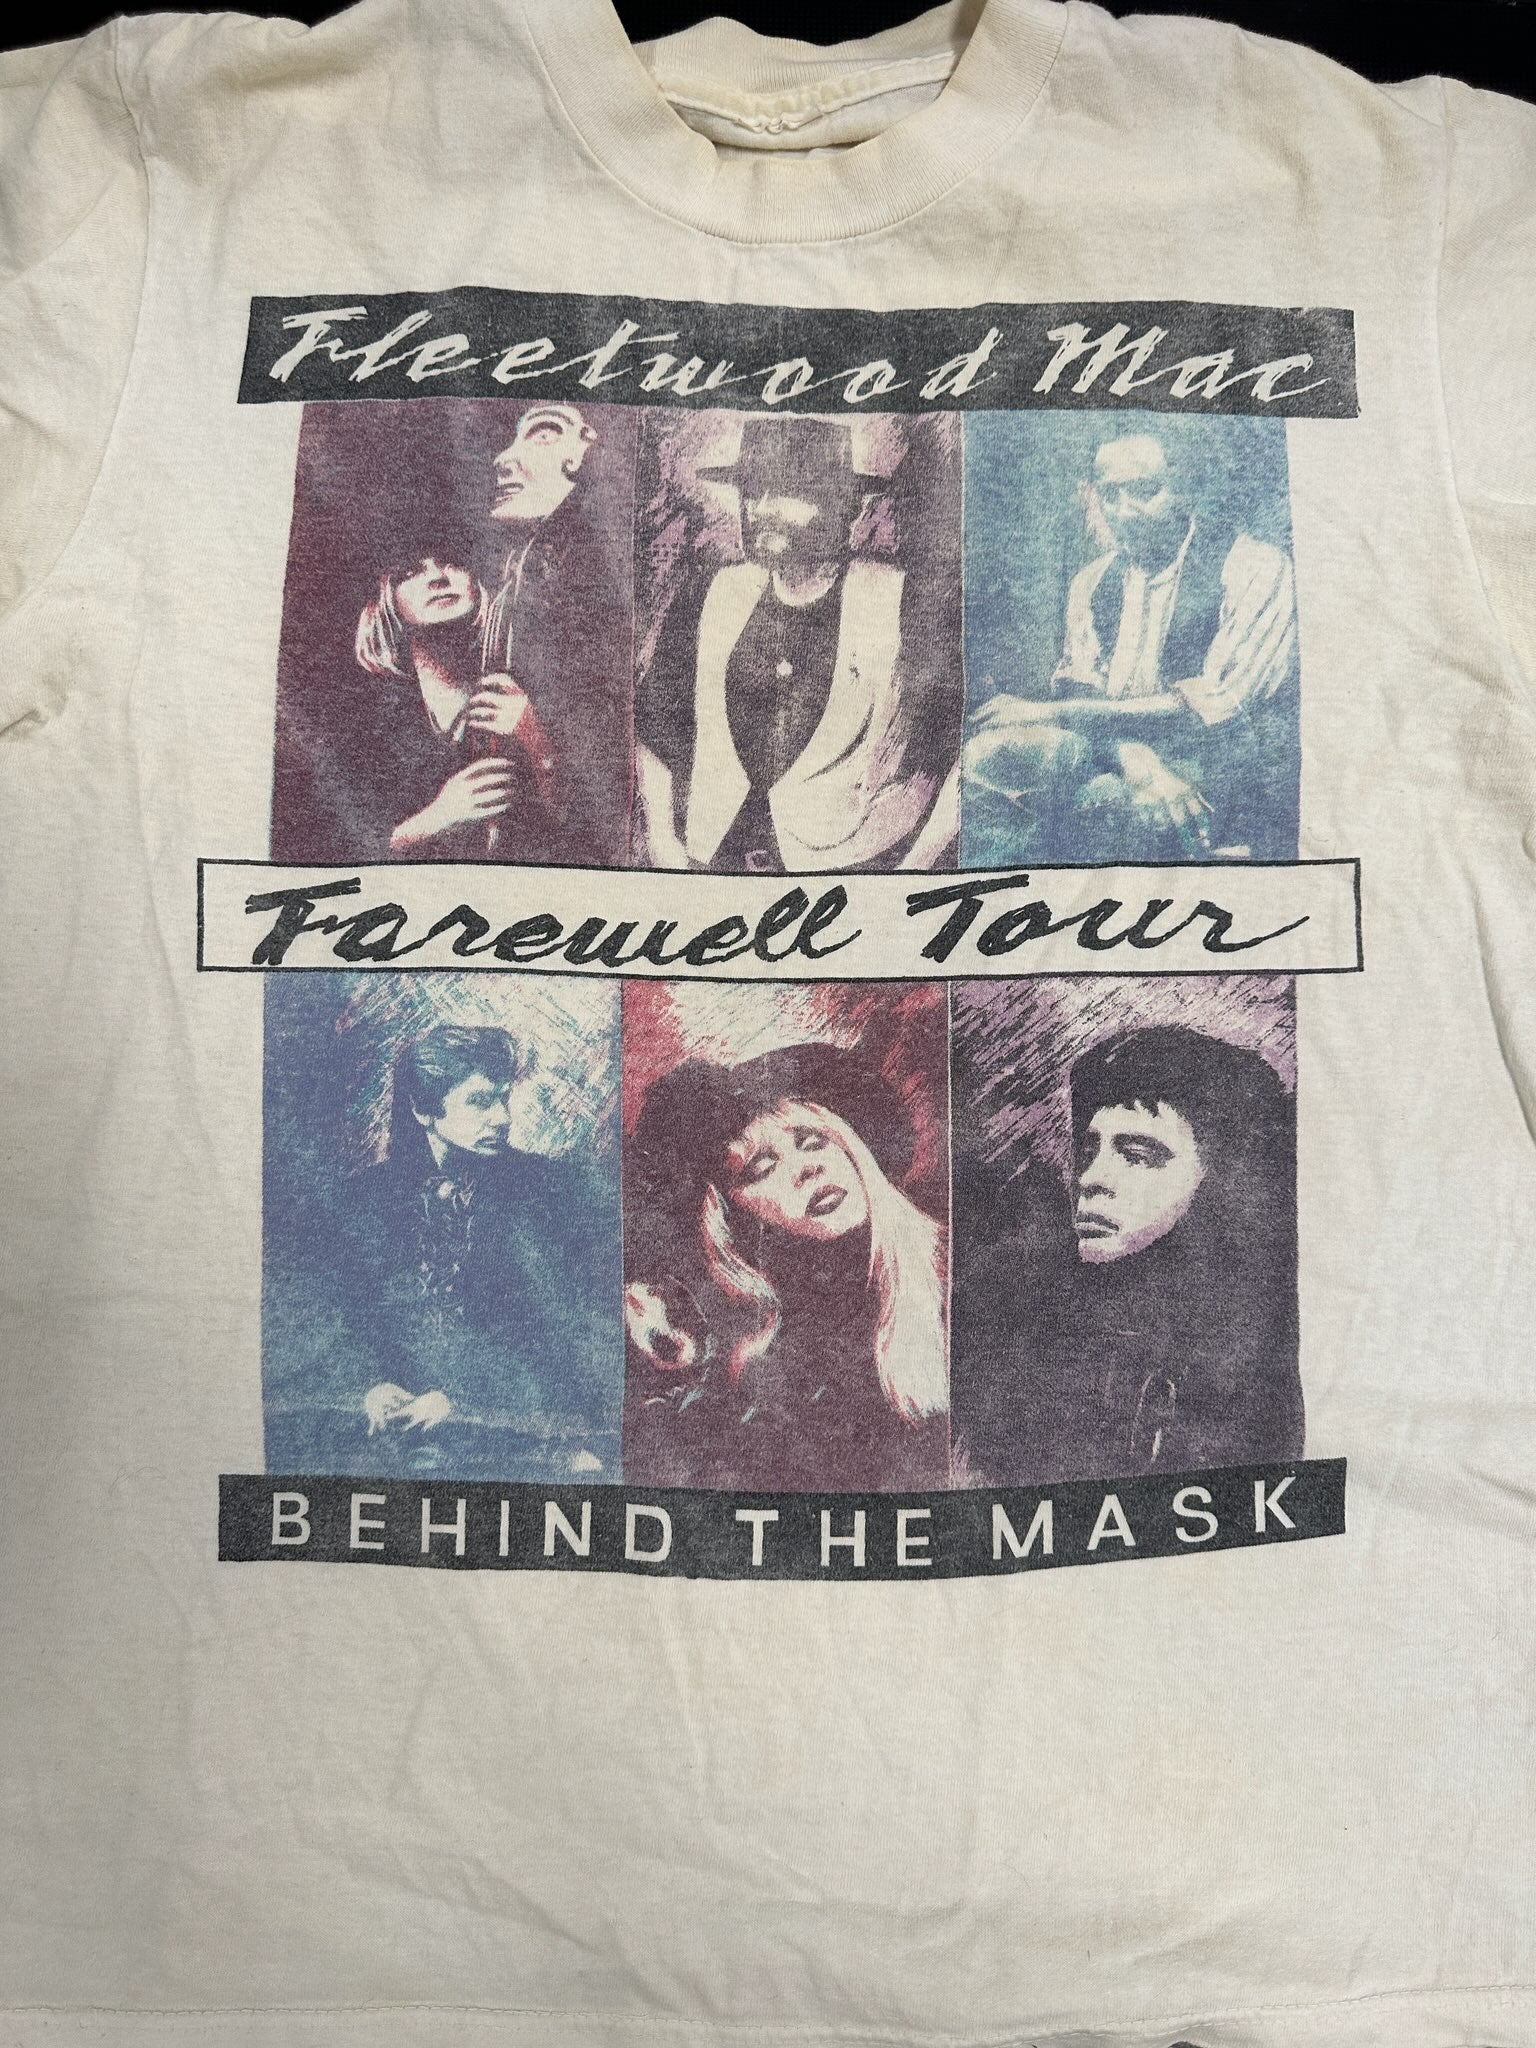 Fleetwood Mac 1990-91 Behind The Mask Farewell Tour T-Shirt, White, Tagless (25" Long, 18.5" Pit To Pit)(Some Yellowing Around Neck; See Pics)